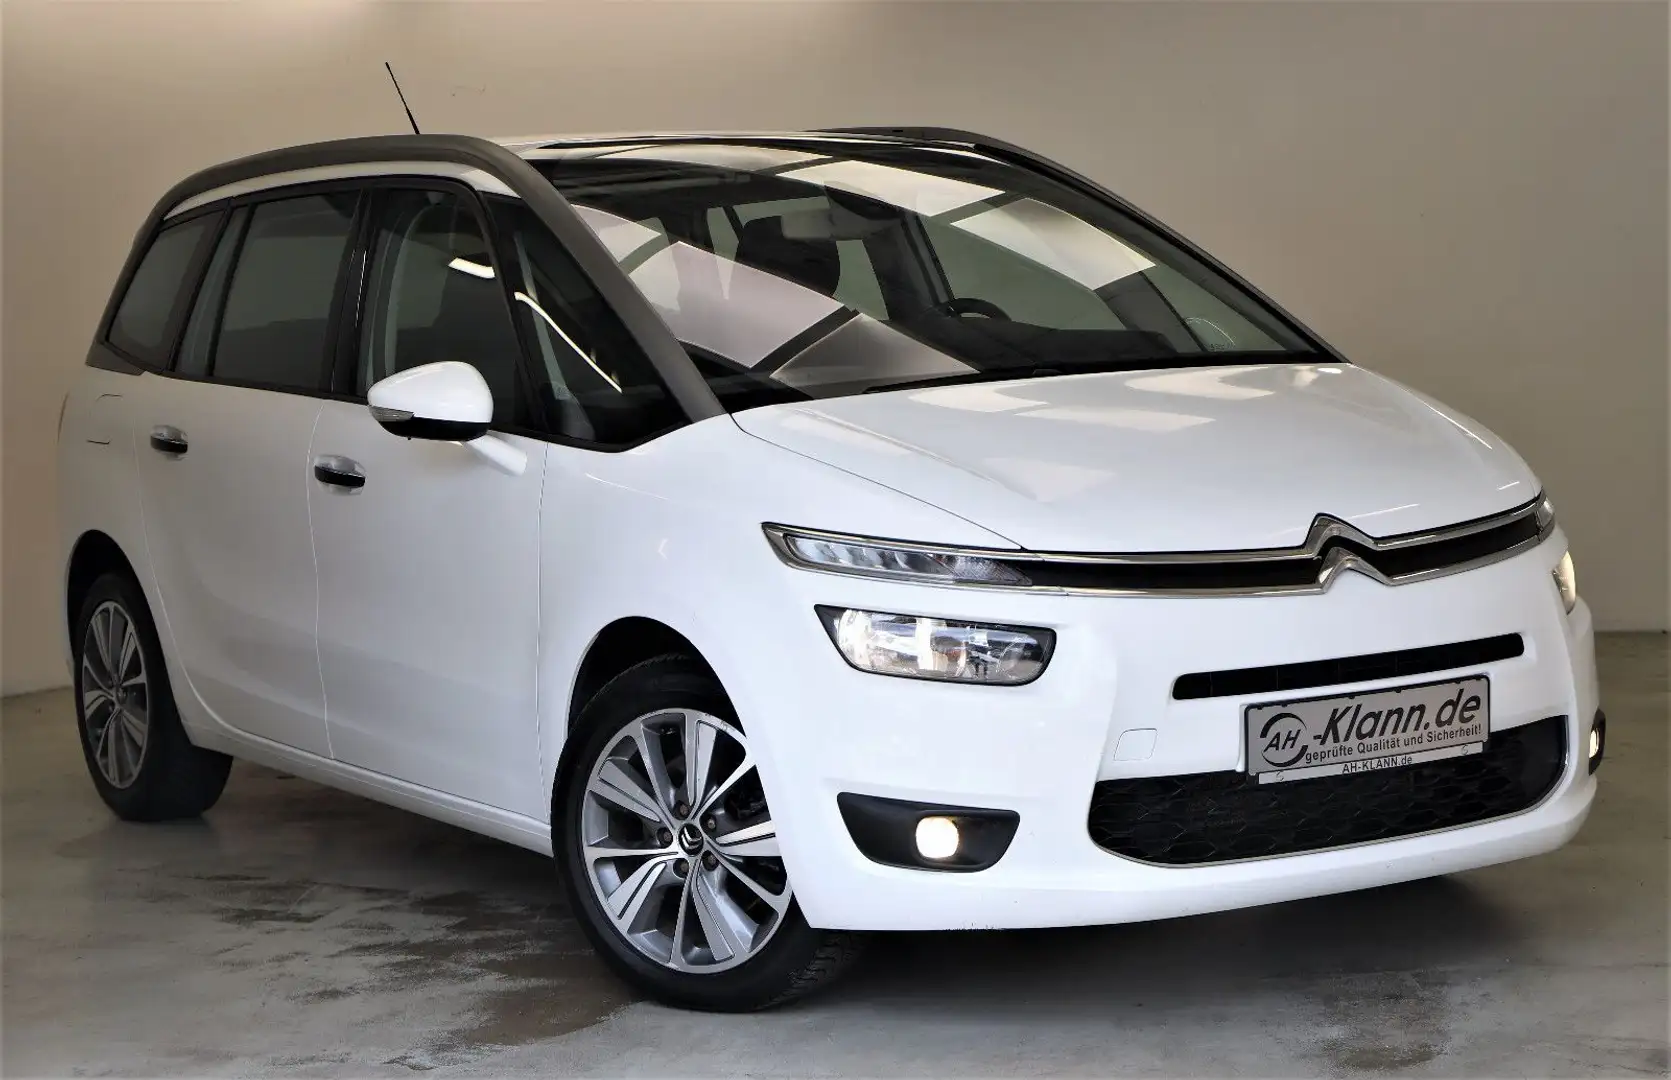 Citroen Grand C4 Picasso C4 2.0 HDi 150PS Grand Picasso/Spacetourer LED Biały - 1